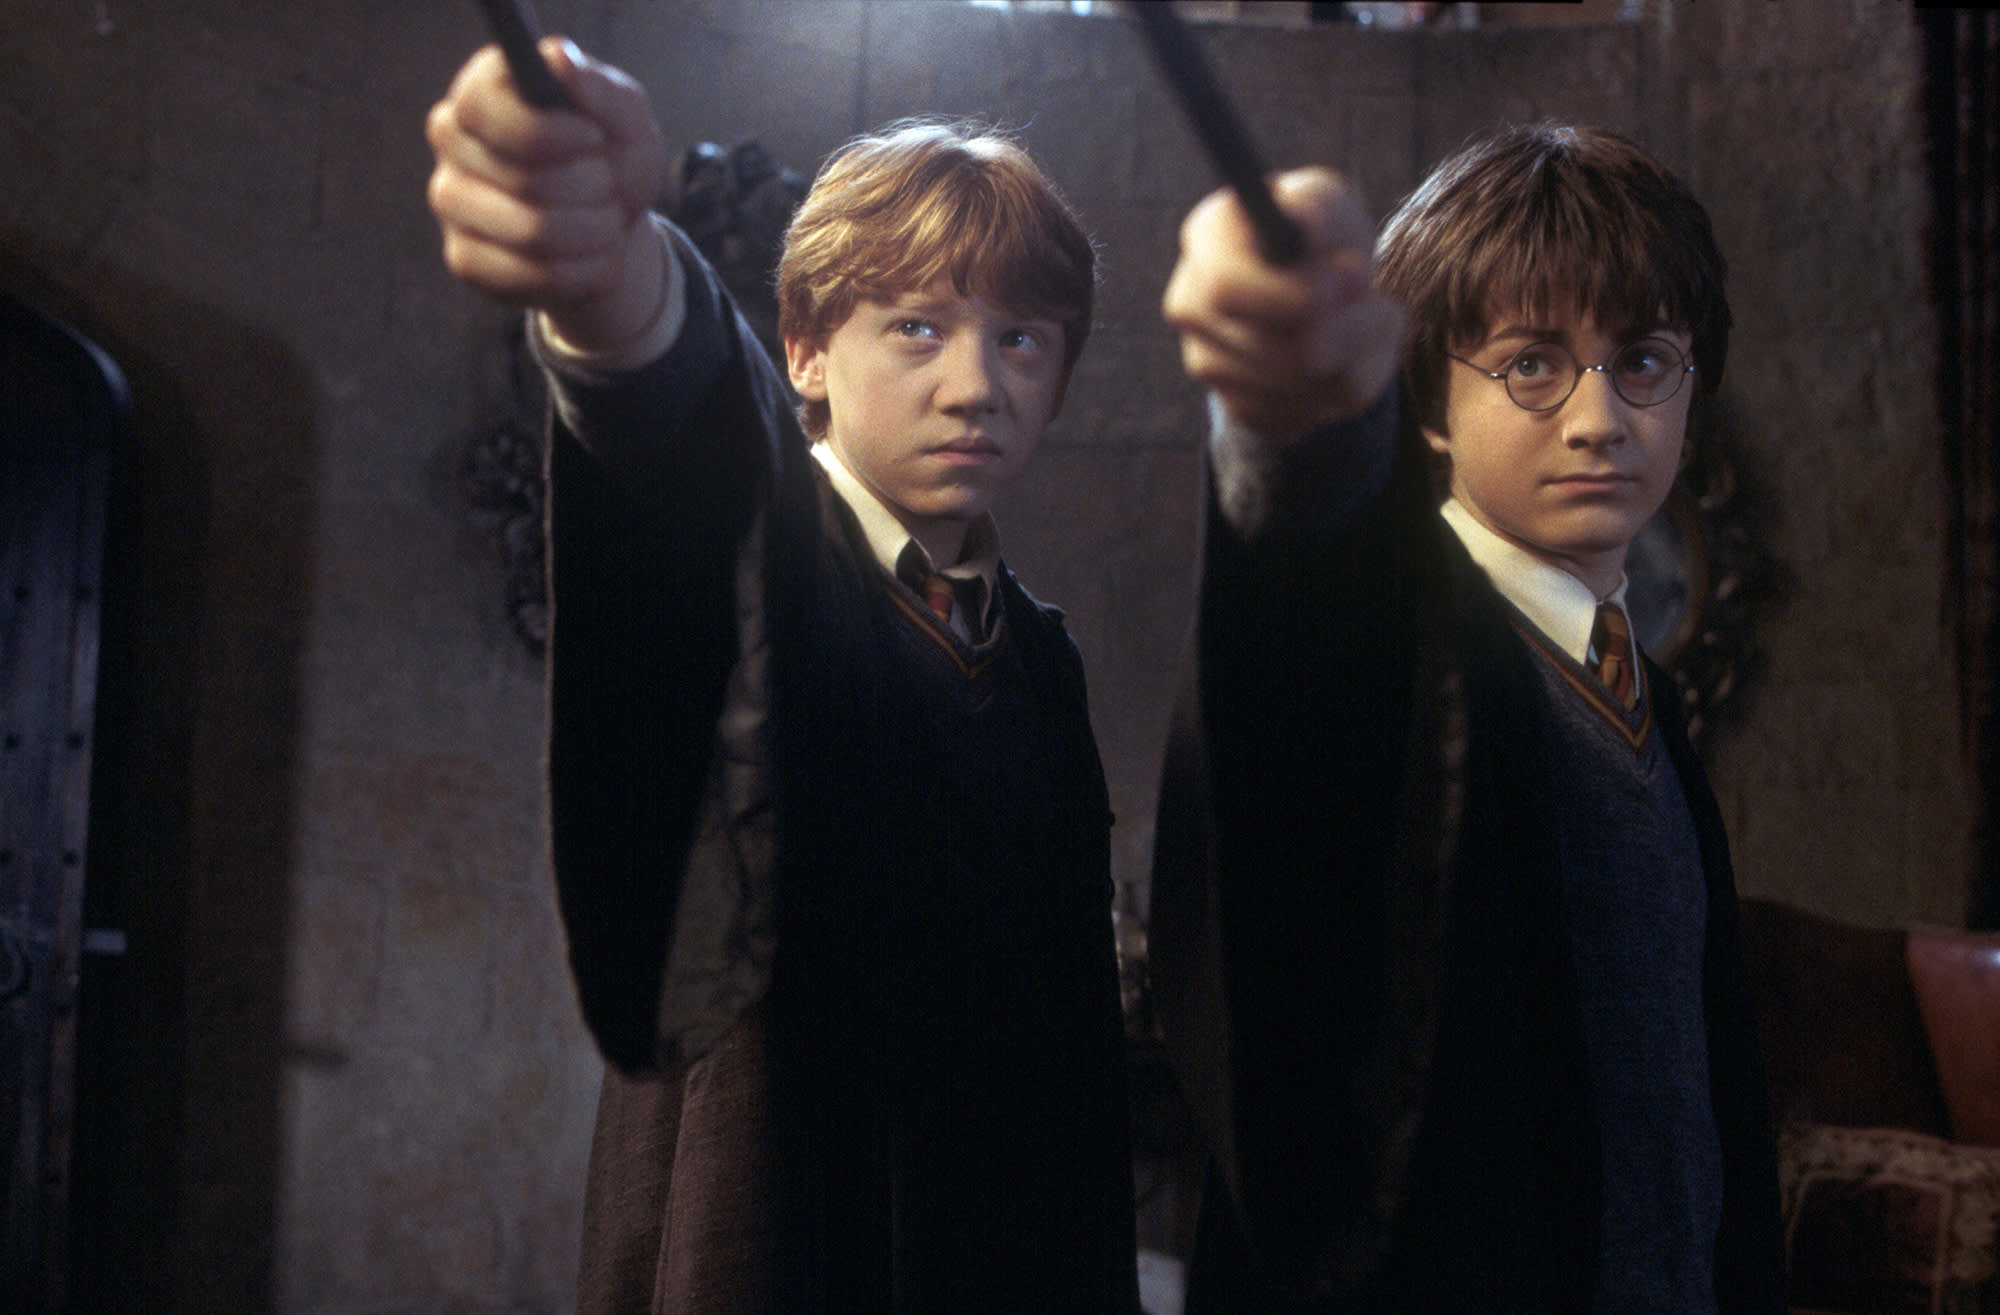 Harry and Ron standing side-by-side with their wands raised. Both look determined.